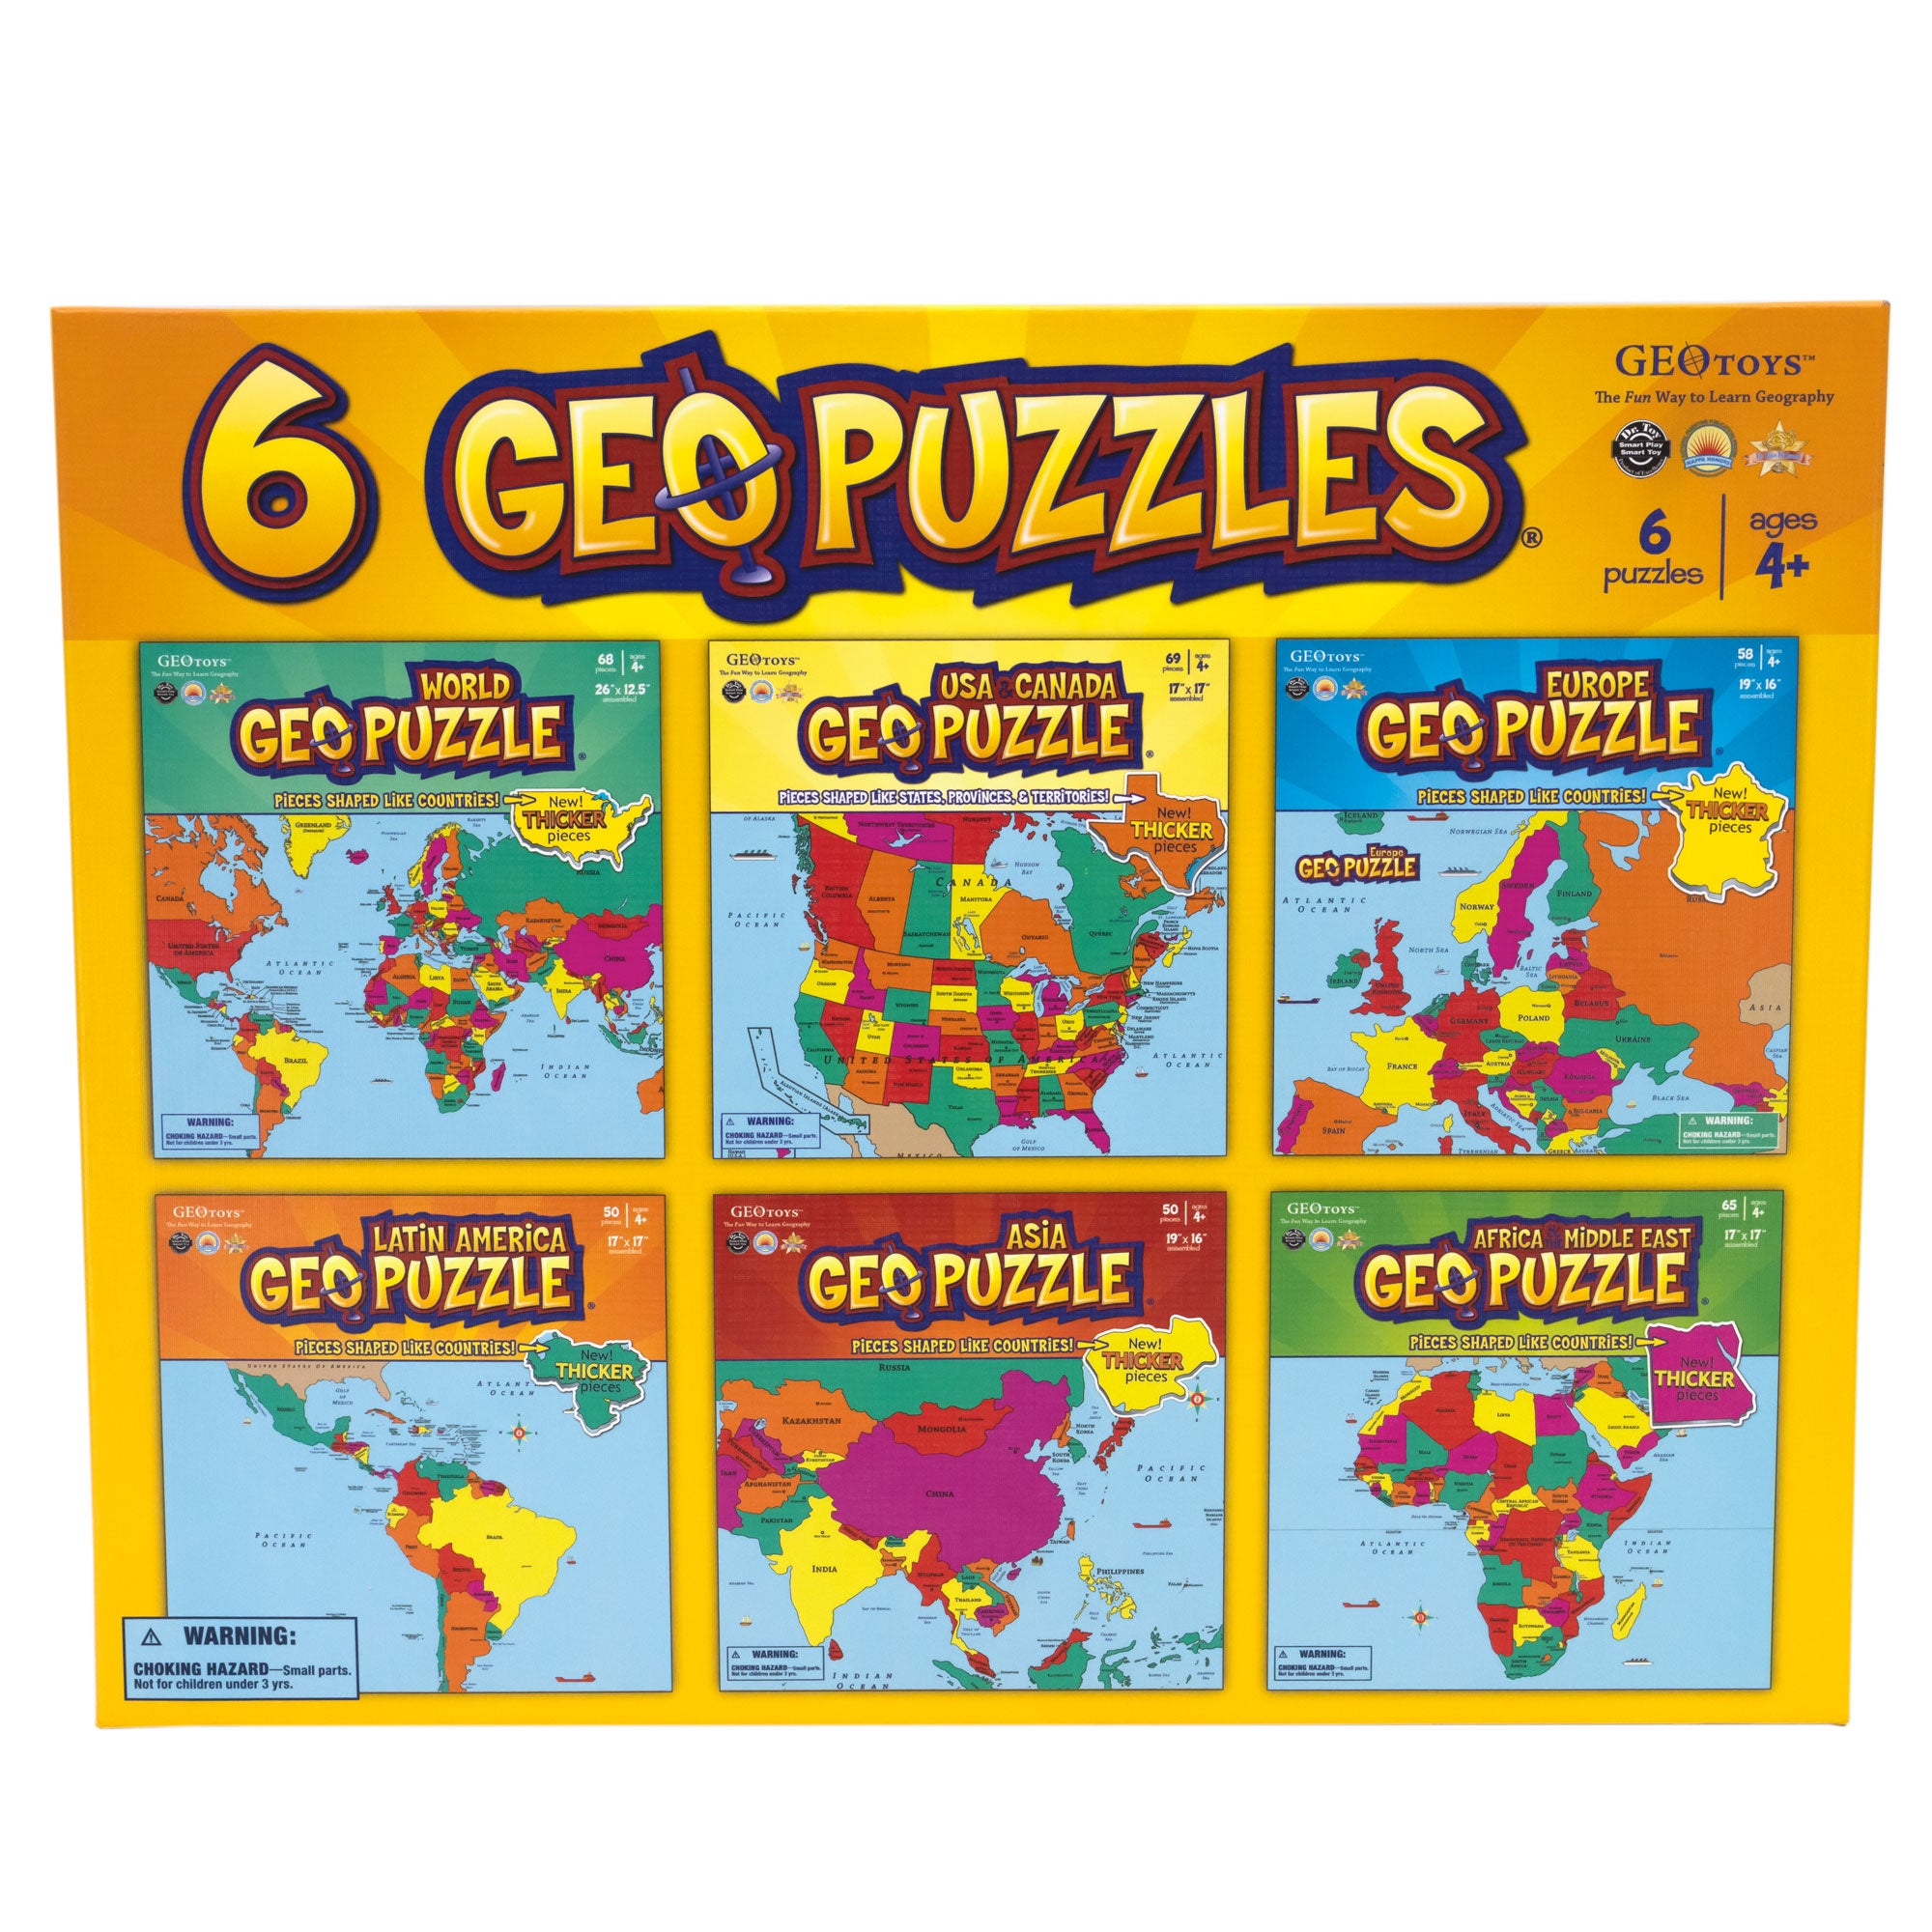 Social Classes Puzzle  Economics Learning Game